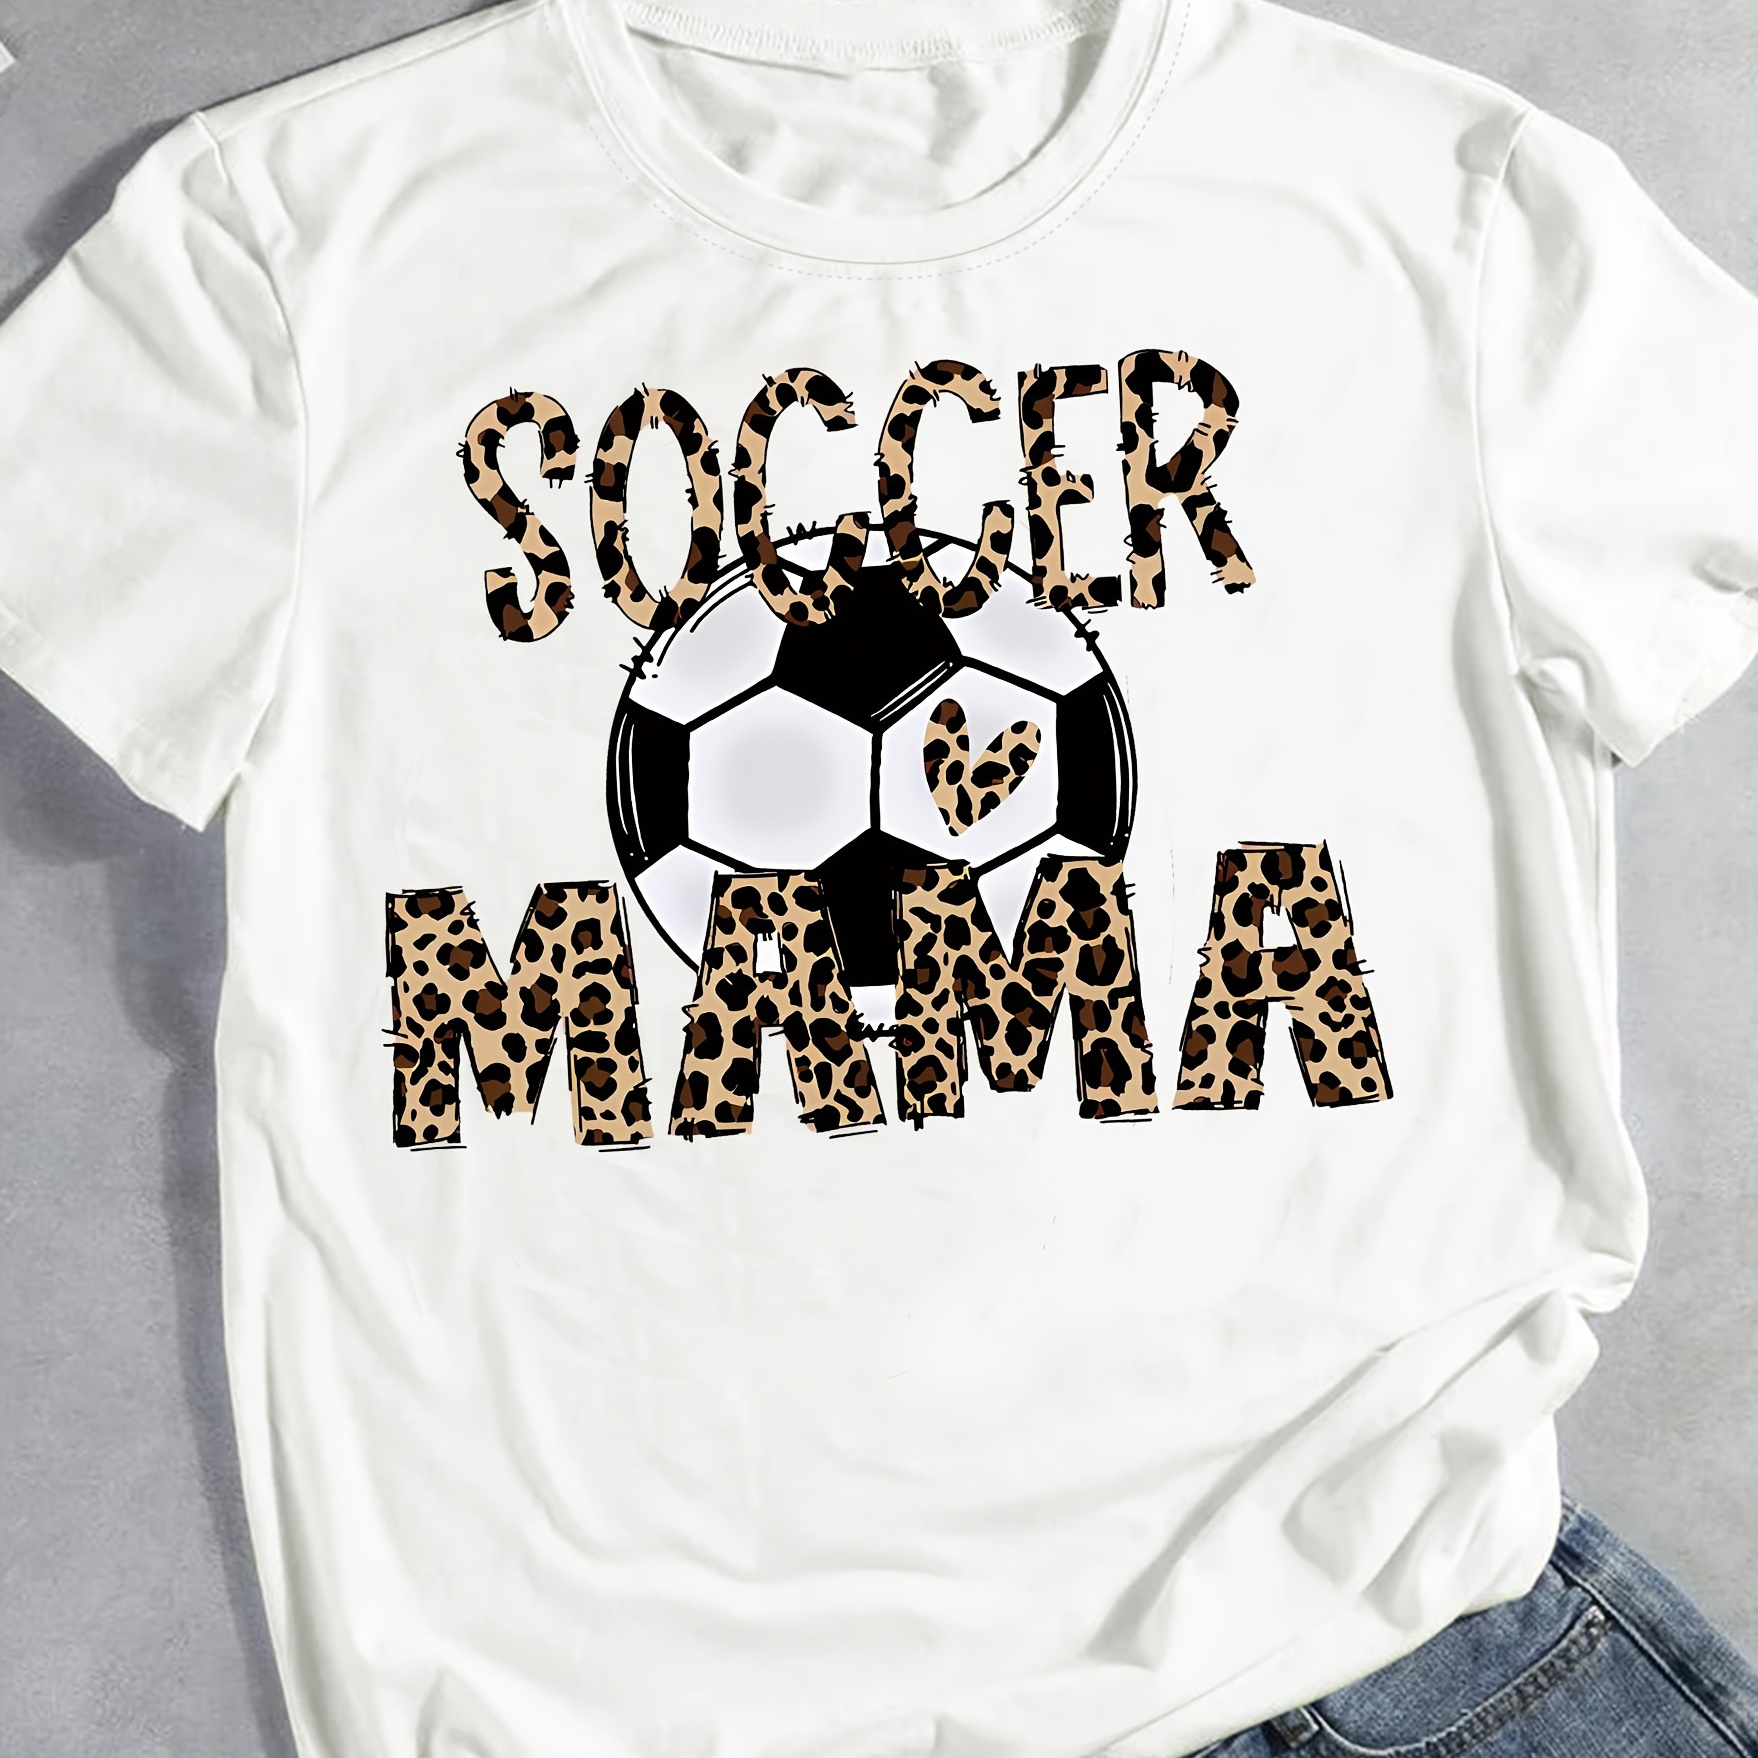 

Soccer & Mama Letter Print T-shirt, Short Sleeve Crew Neck Casual Top For Summer & Spring, Women's Clothing